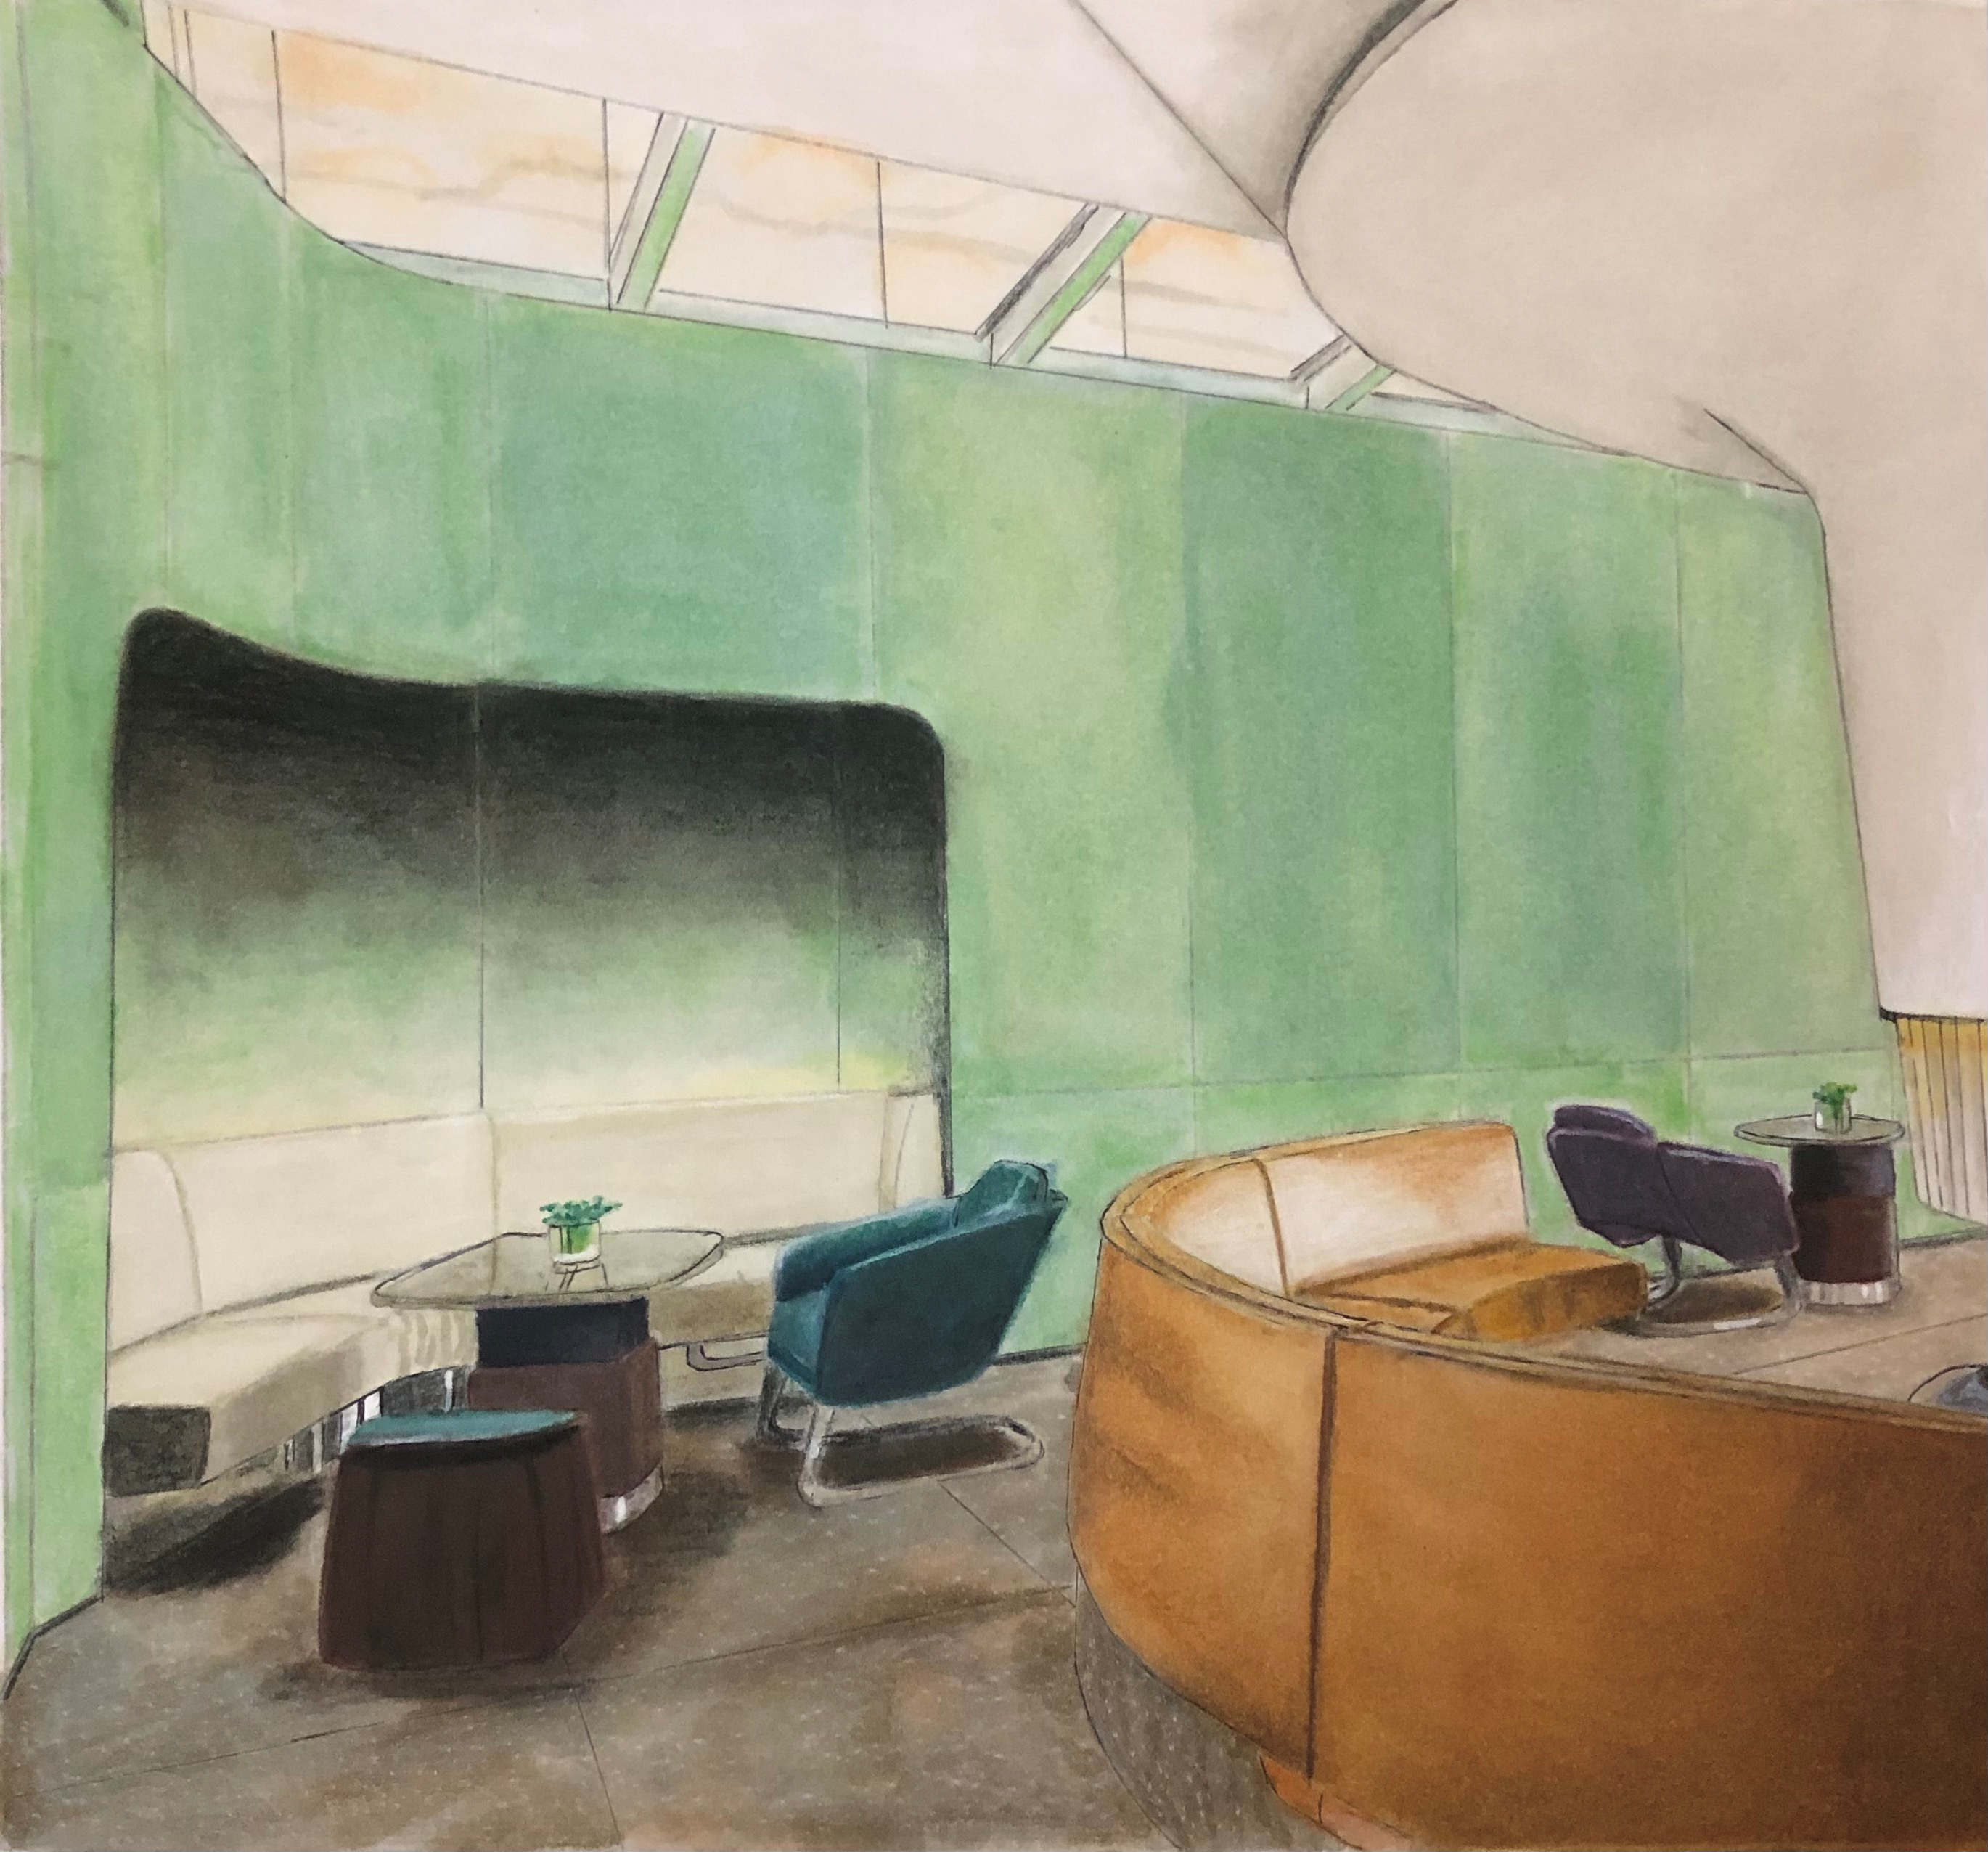 Hand rendering of a waiting area with curved sofa.